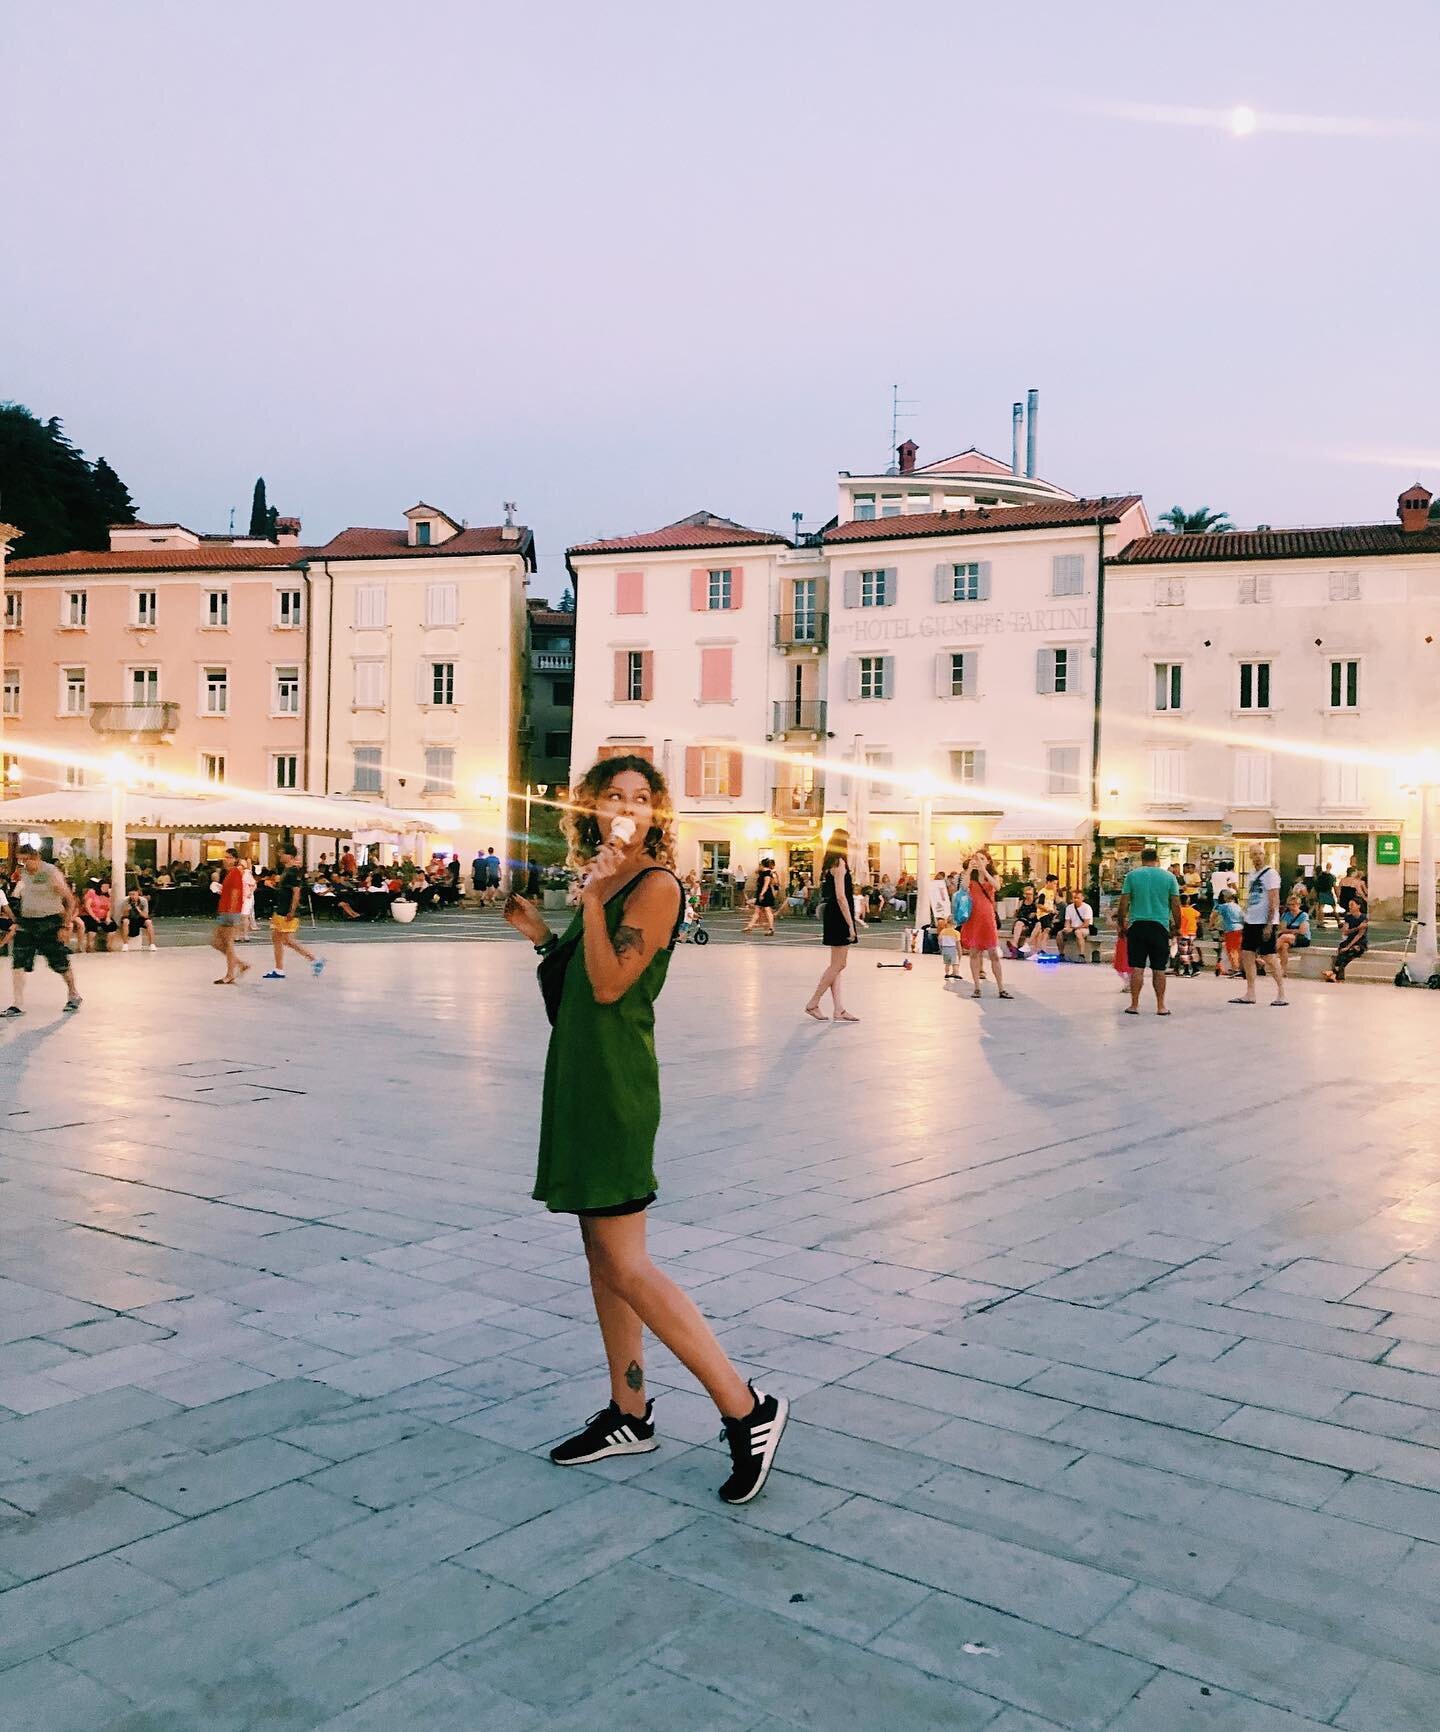 The Slovenian riviera is merely 46.6 km of perfect coastline, and proof that quality beats quantity every damn time. 
🍦
🌞
🌊
#piran #slovenija